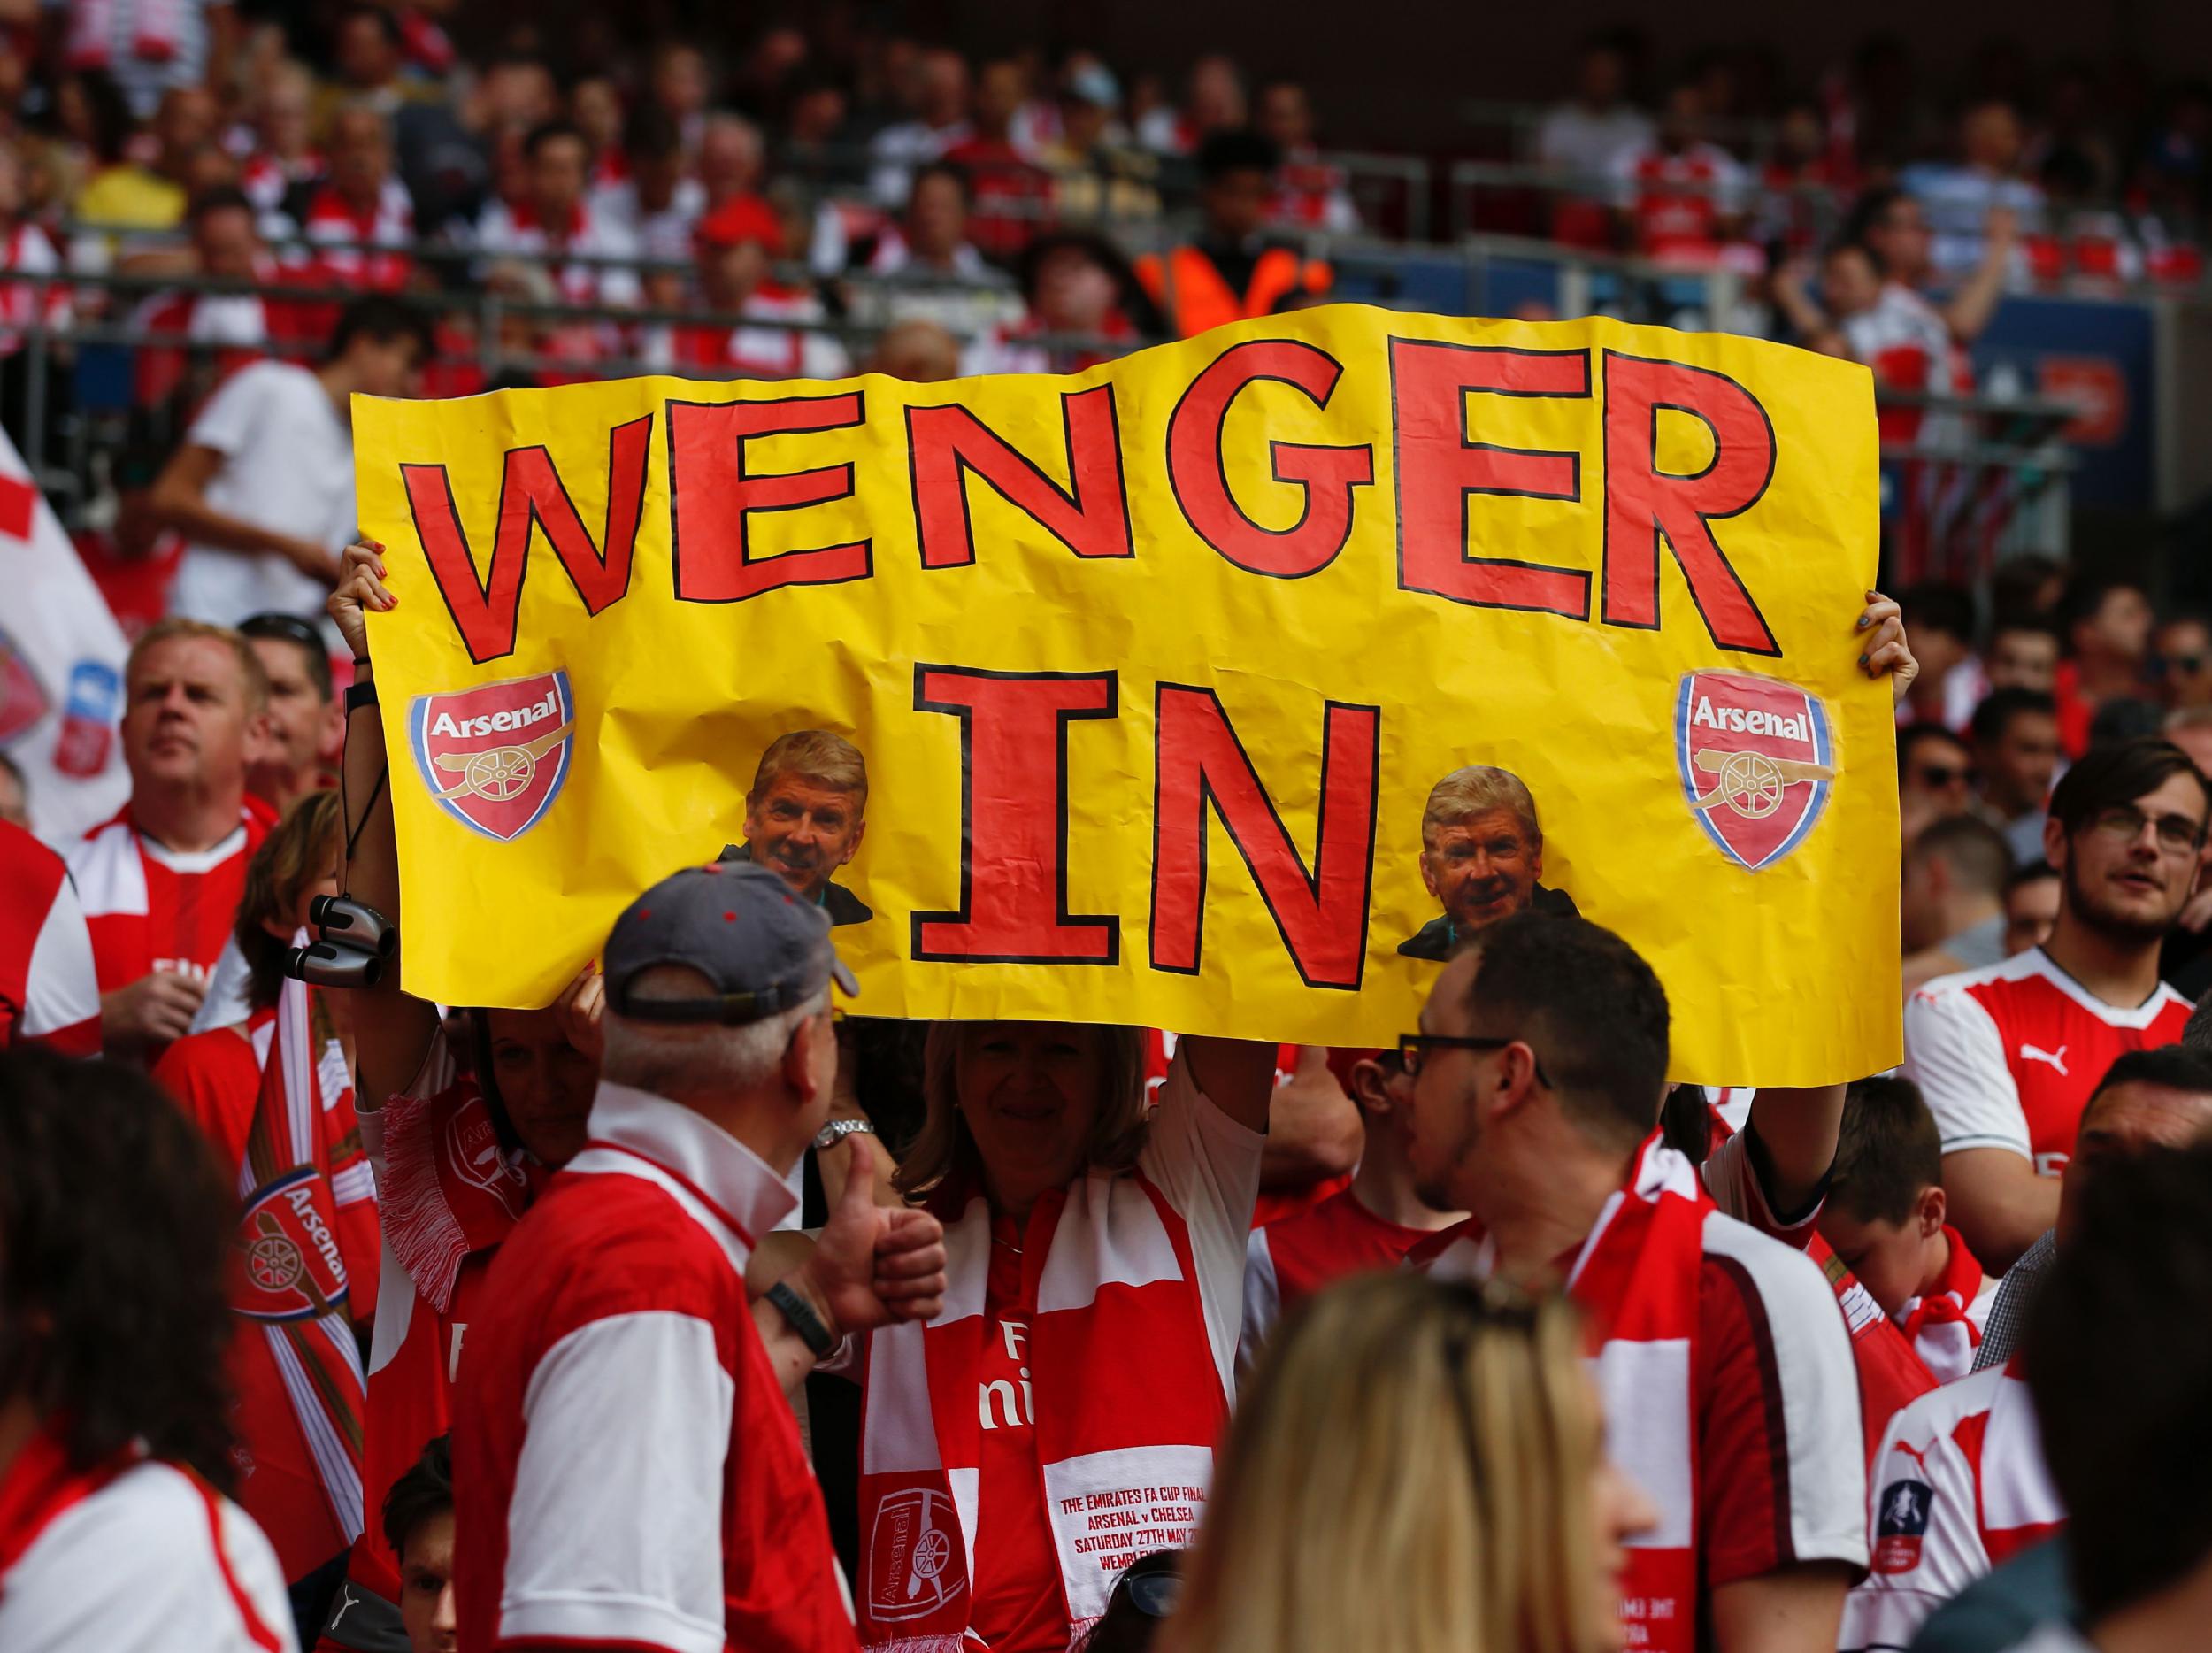 Wenger has been offered a contract extension by the club